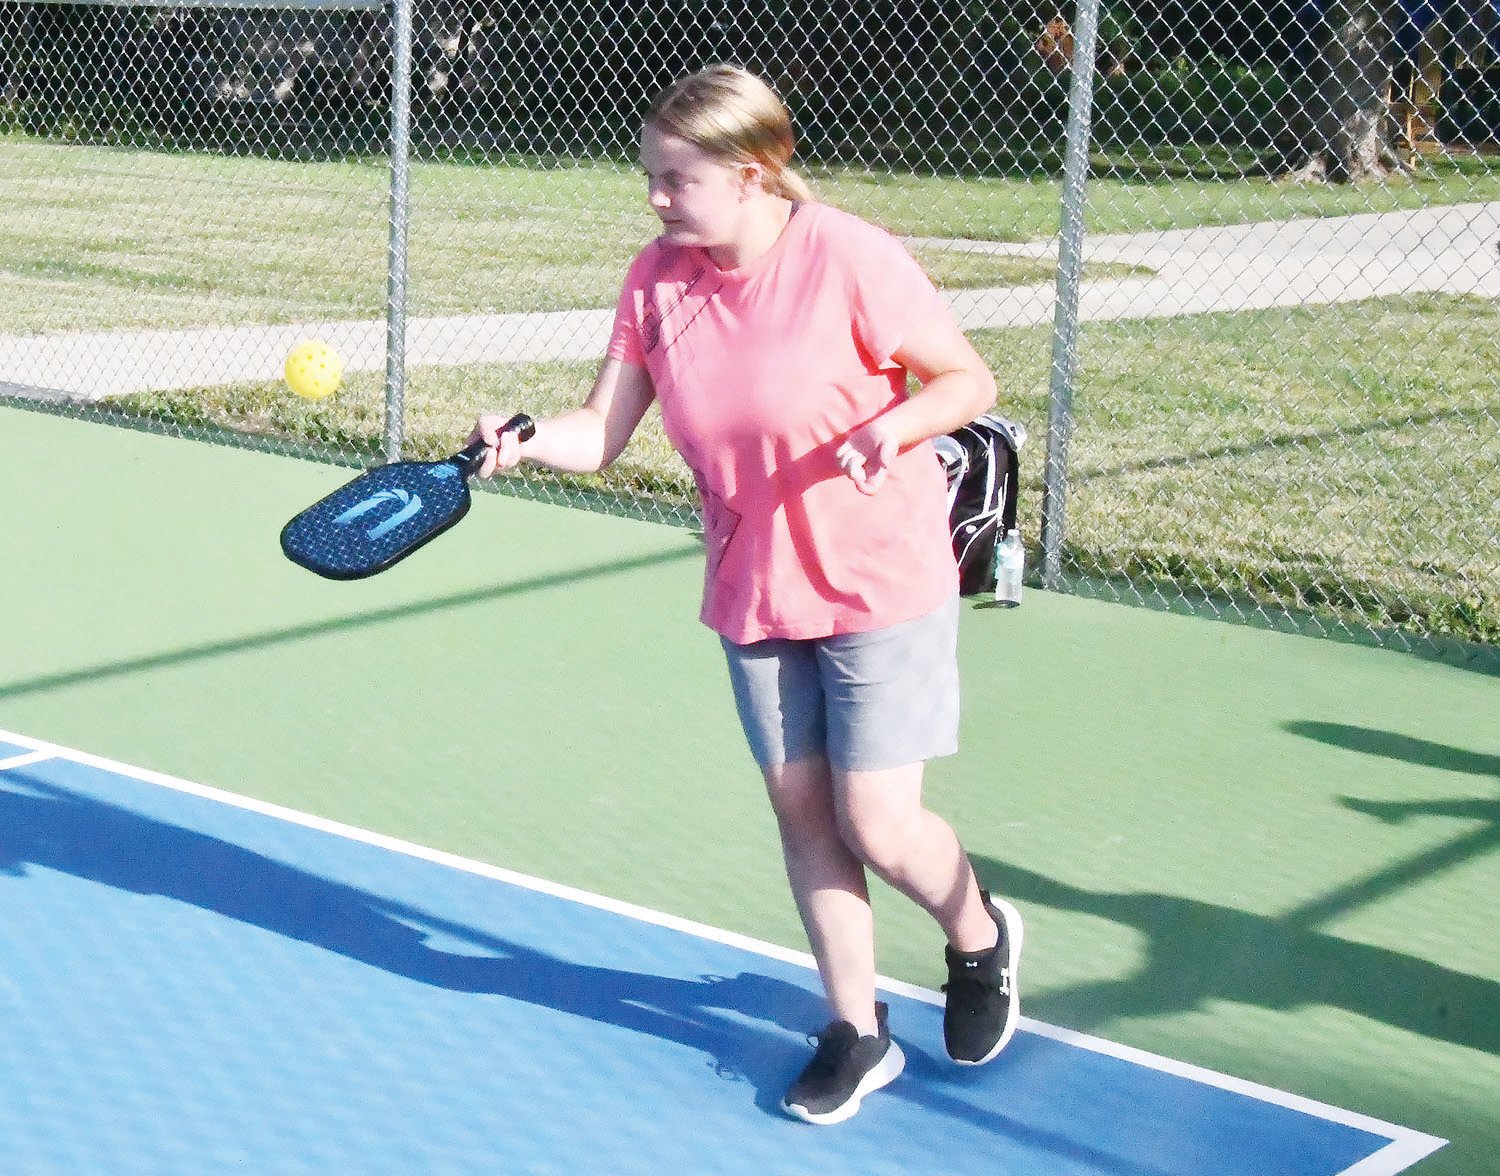 Fourteen-year-old Lucy Hargis, soon-to-be a Moberly High School ninth-grader, has recently picked up the game of pickleball. It’s a way for her to bond with her father, Charlie Hargis.